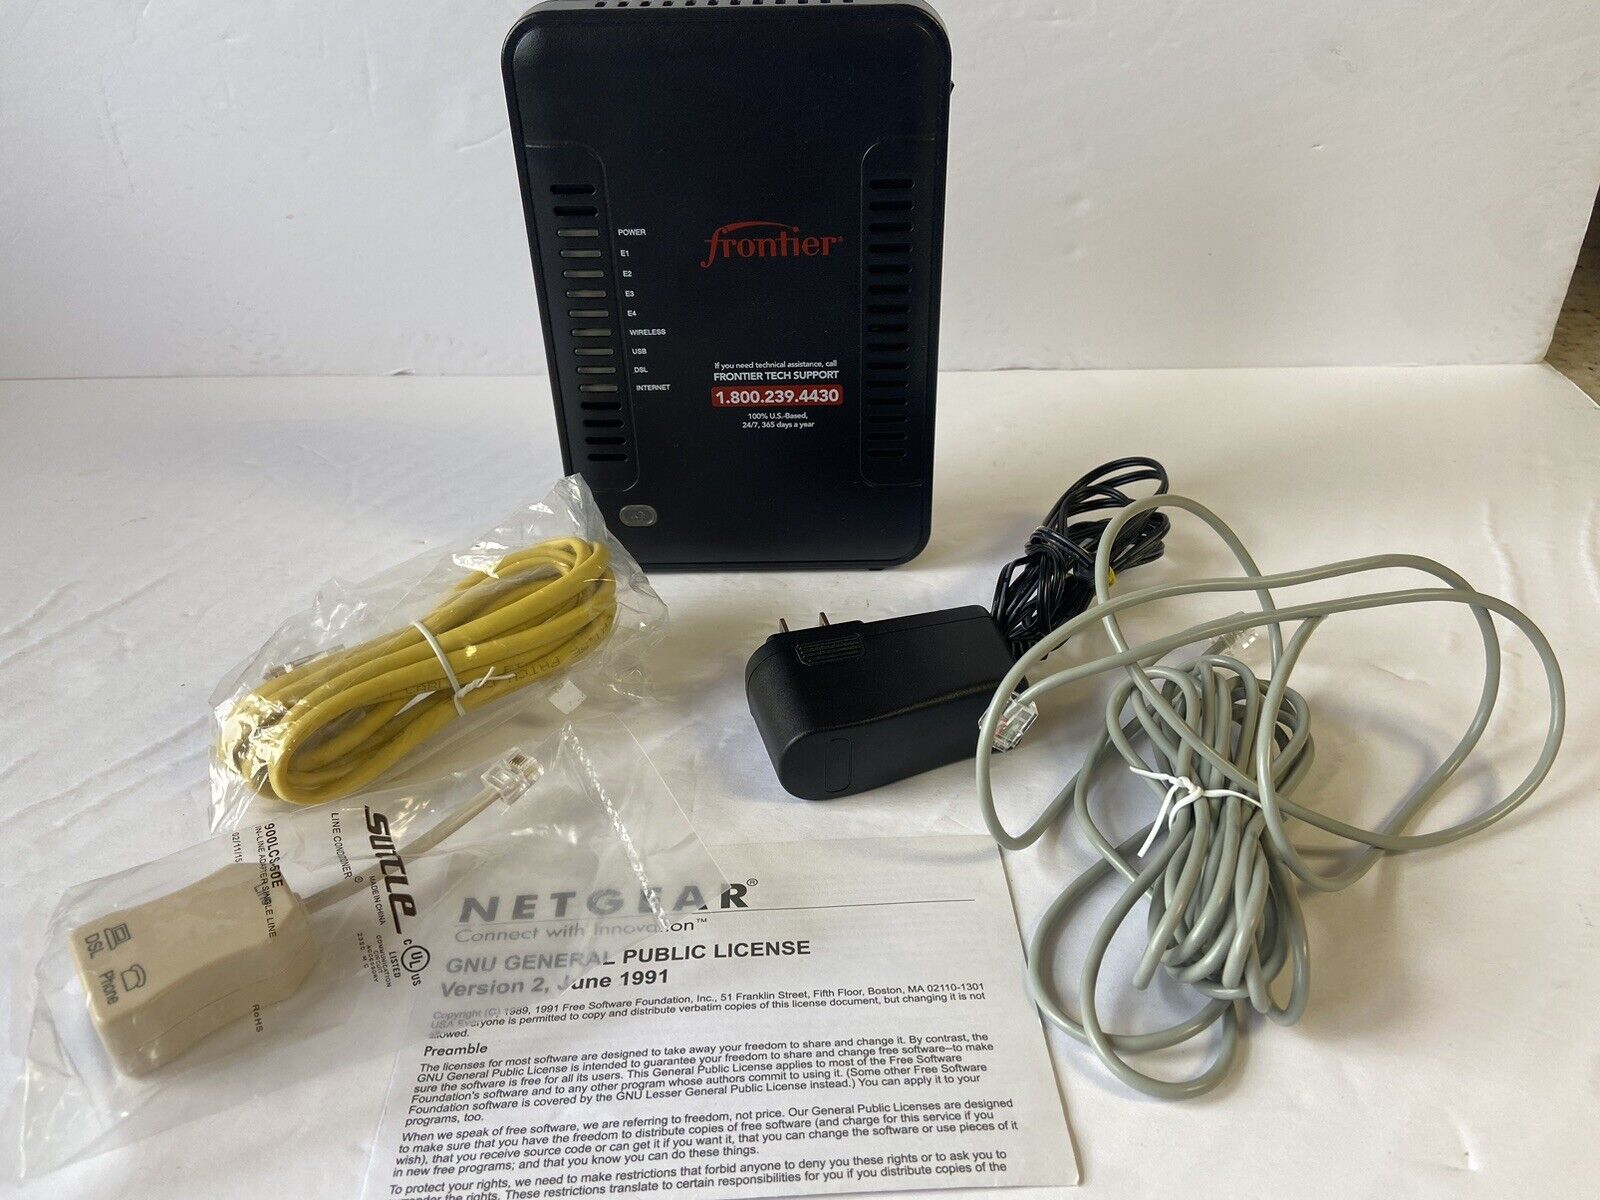 FRONTIER NETGEAR B90-755044-15 MODEL 7550 MODEM ROUTER WITH CORDS